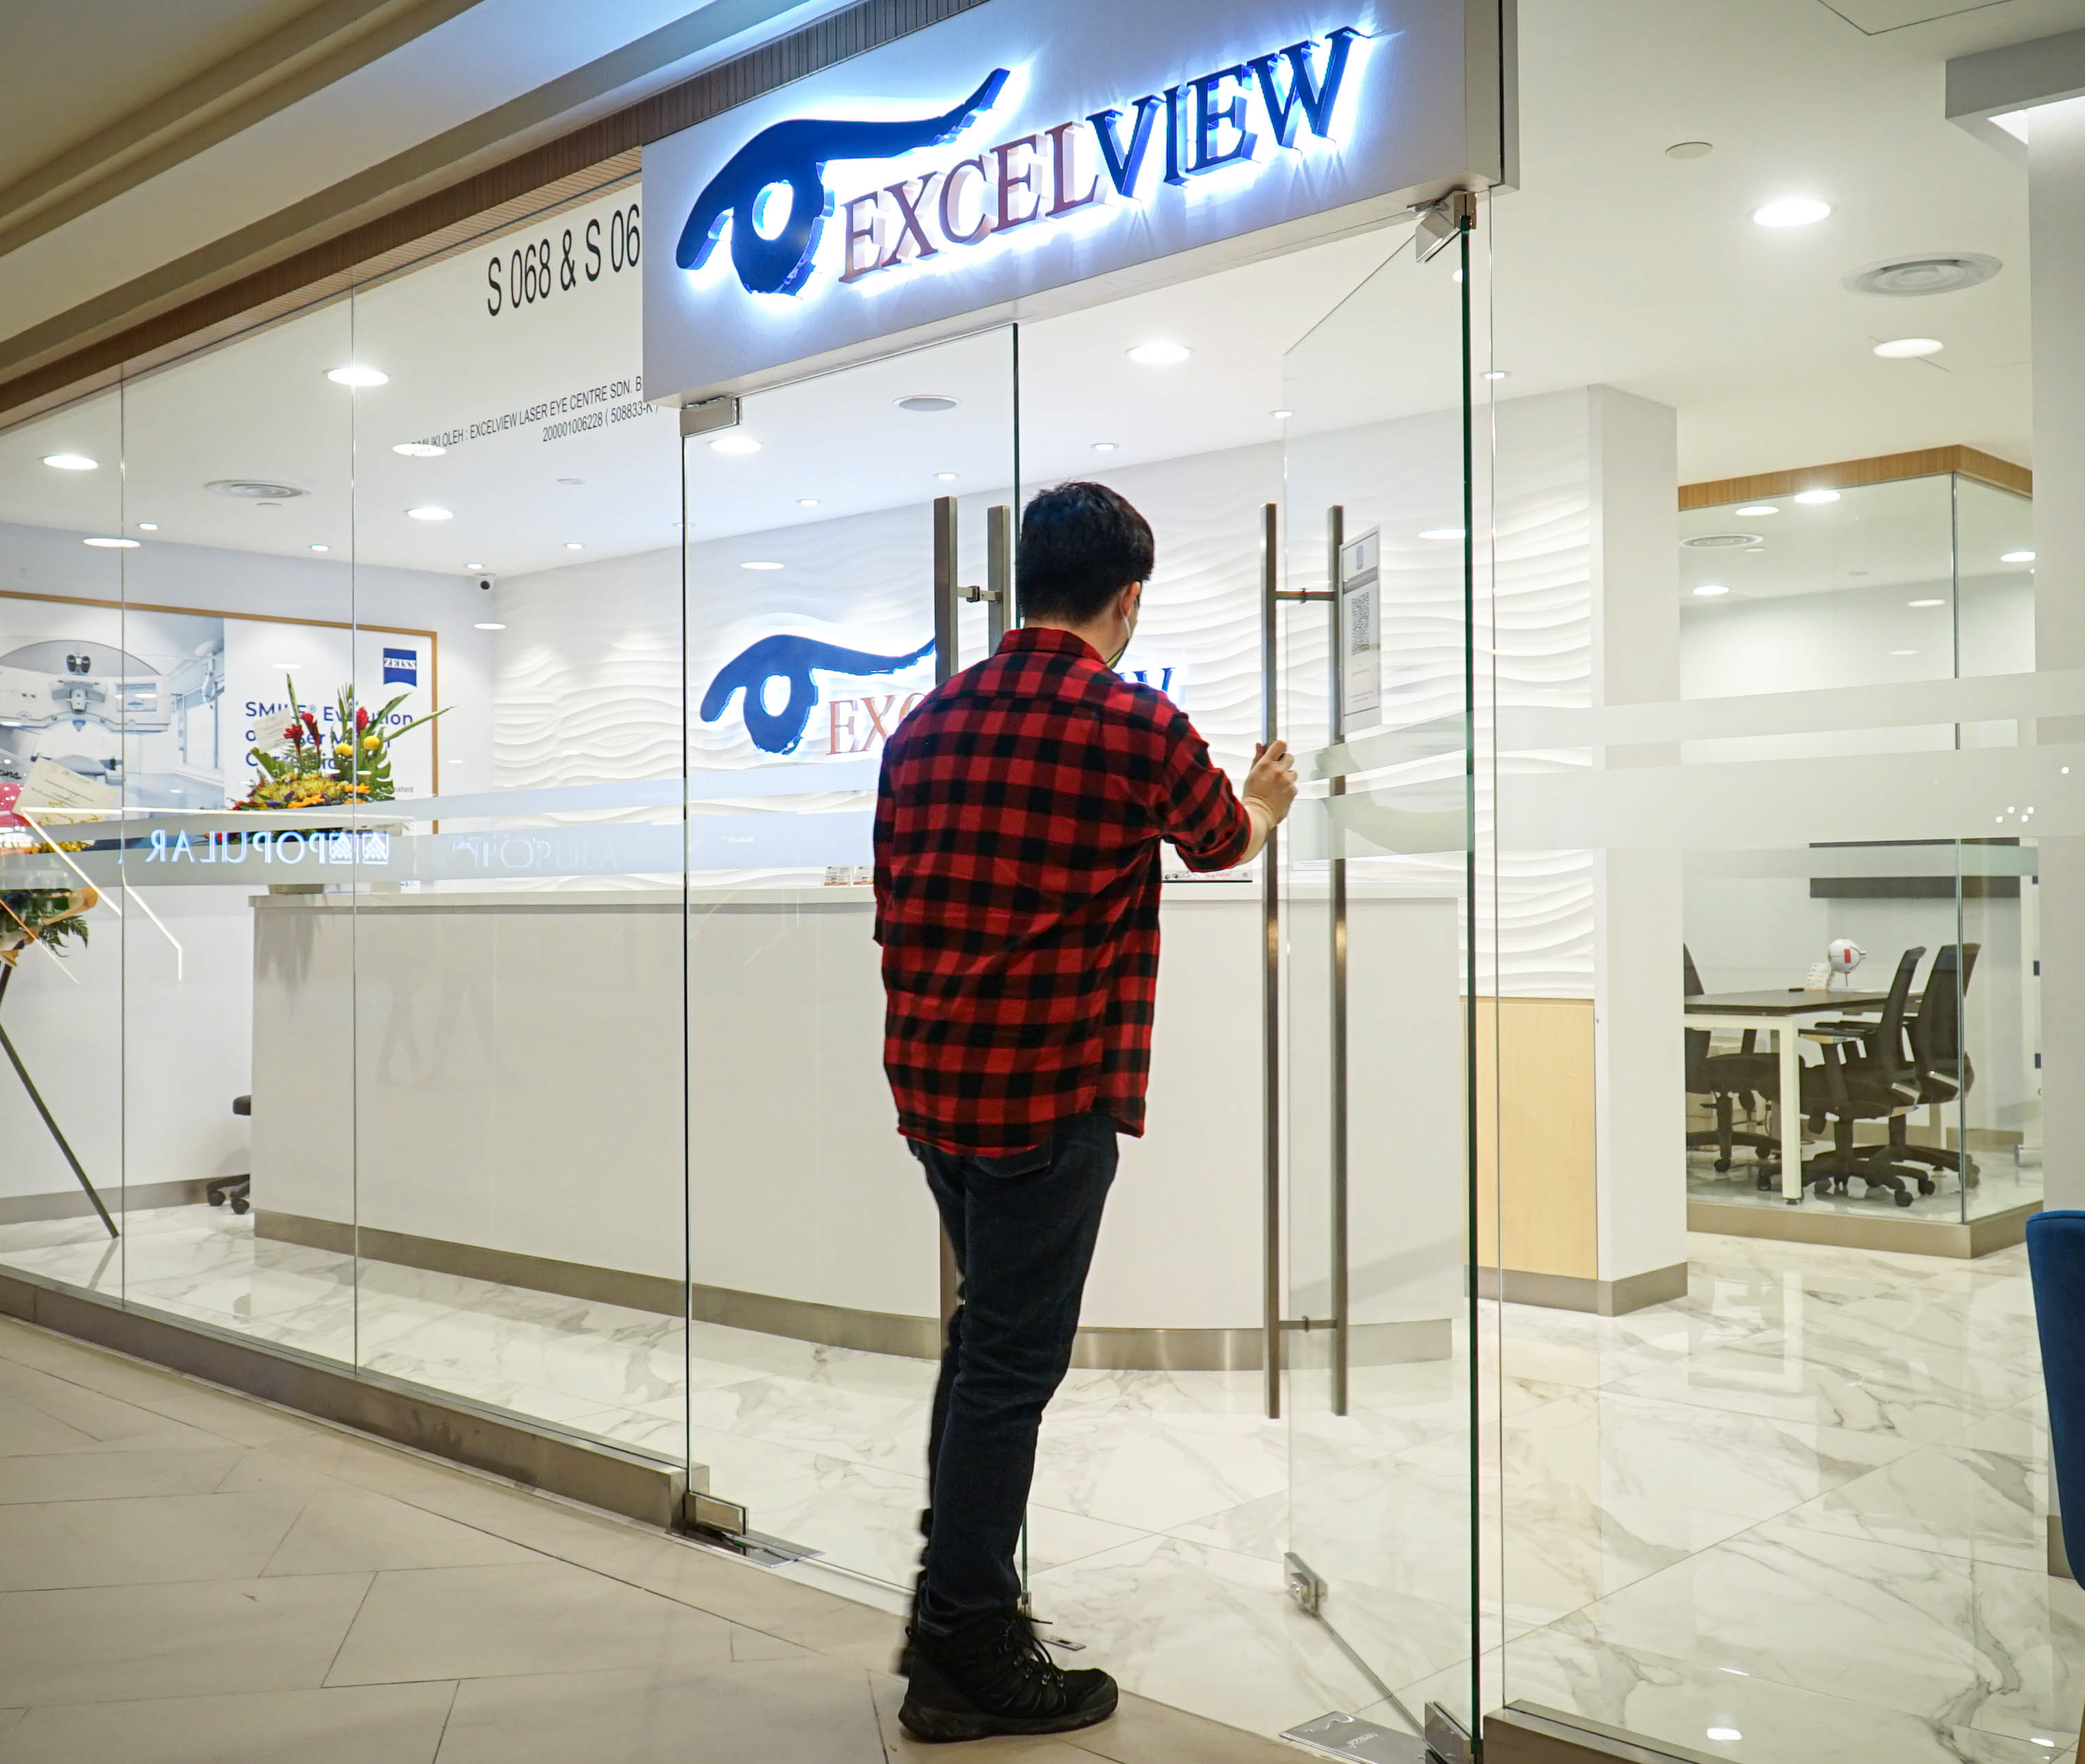 Excelview Eye Specialist Centre